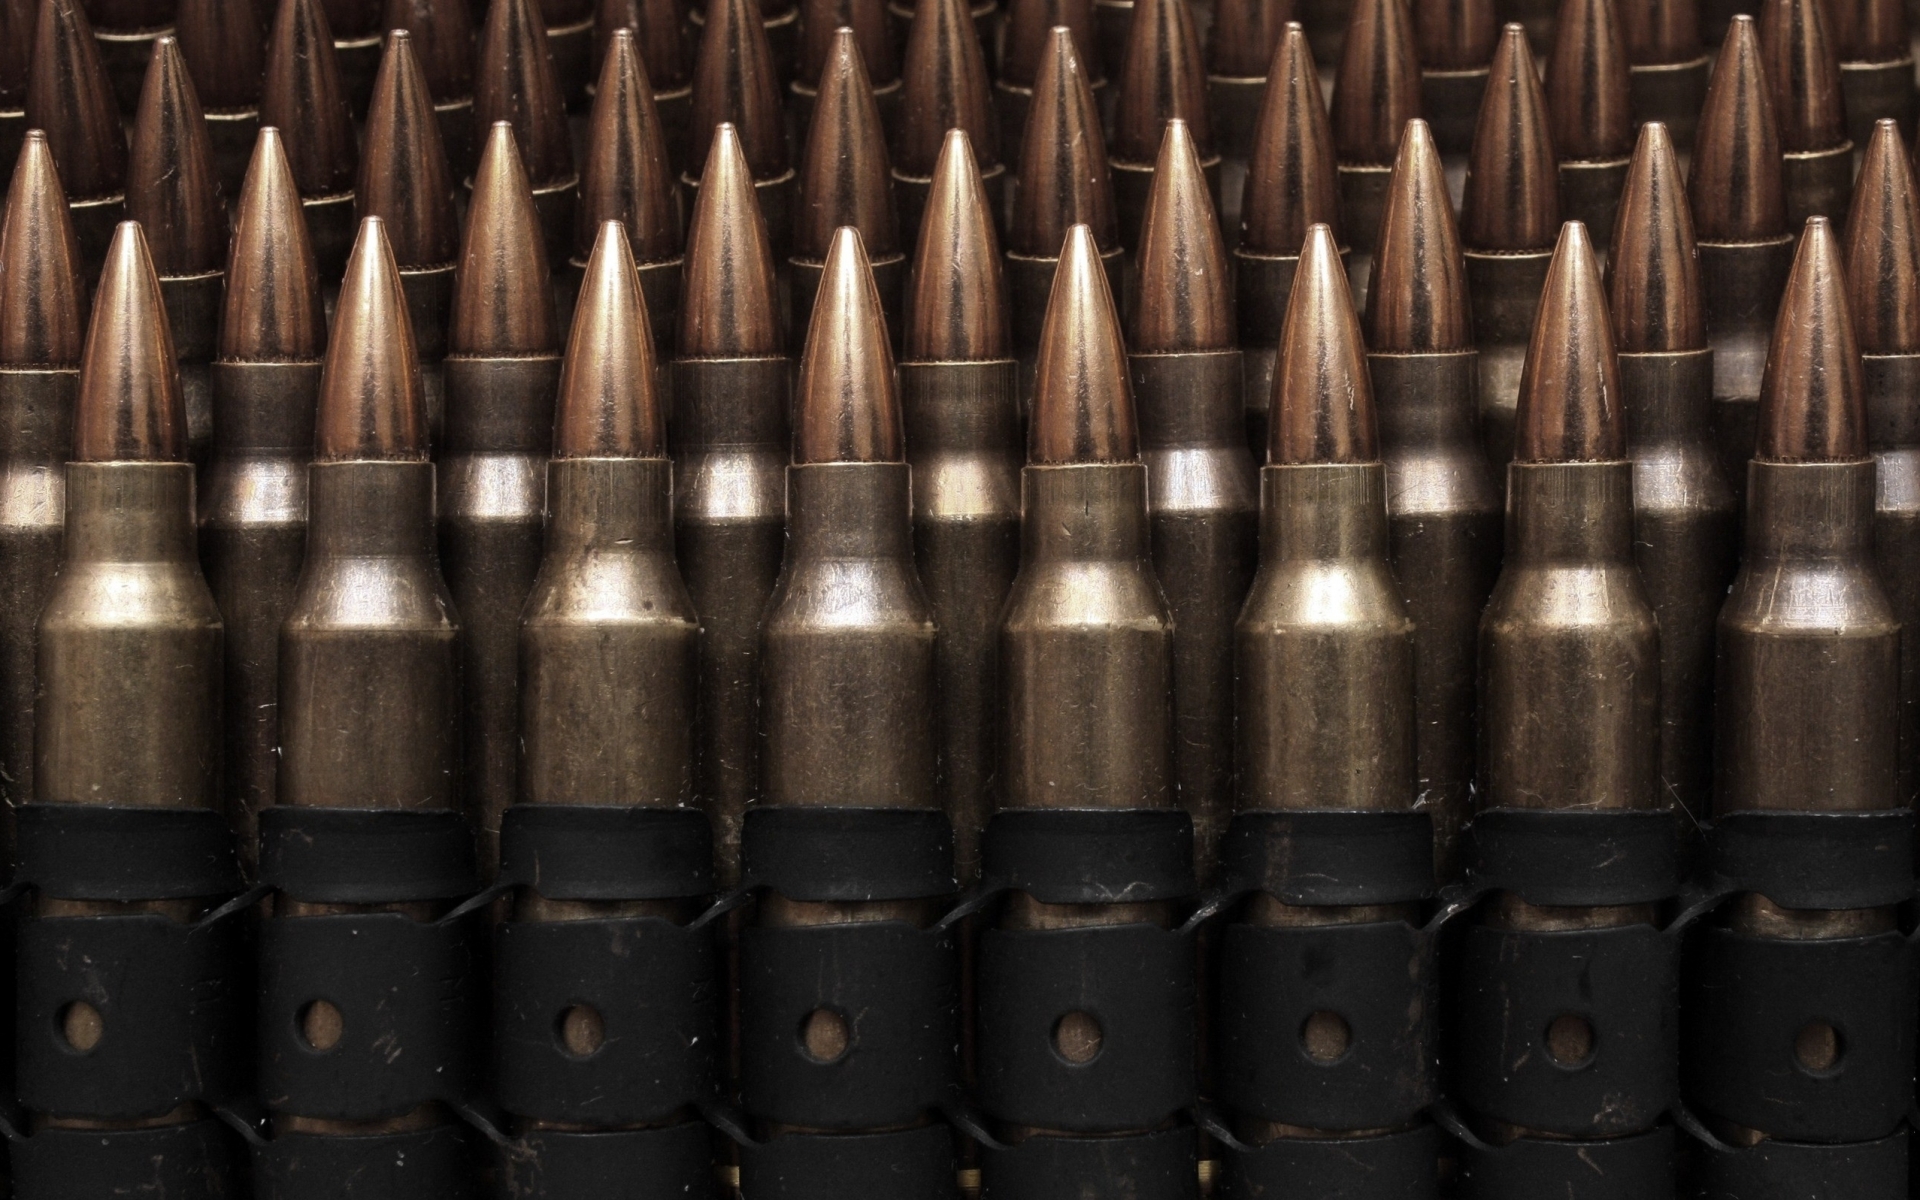 Wallpapers bullet ammo weapons on the desktop